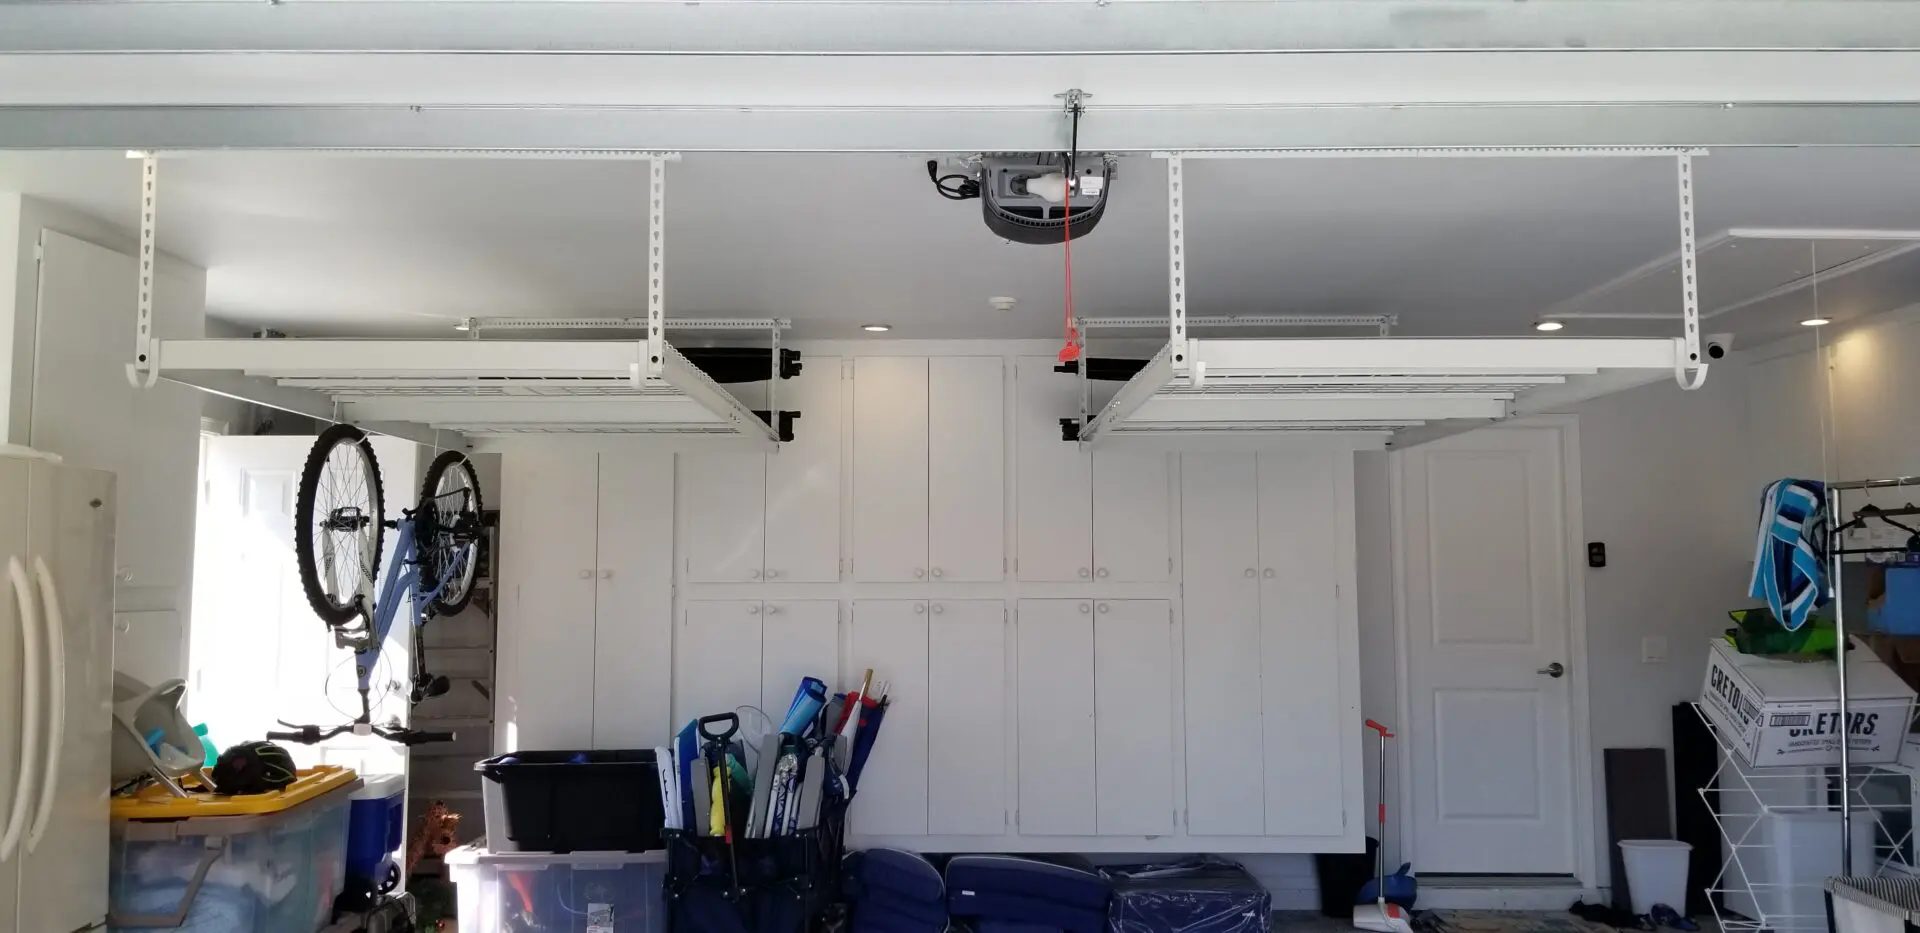 A garage with overhead storage and hooks for bicycles, cabinets at the back